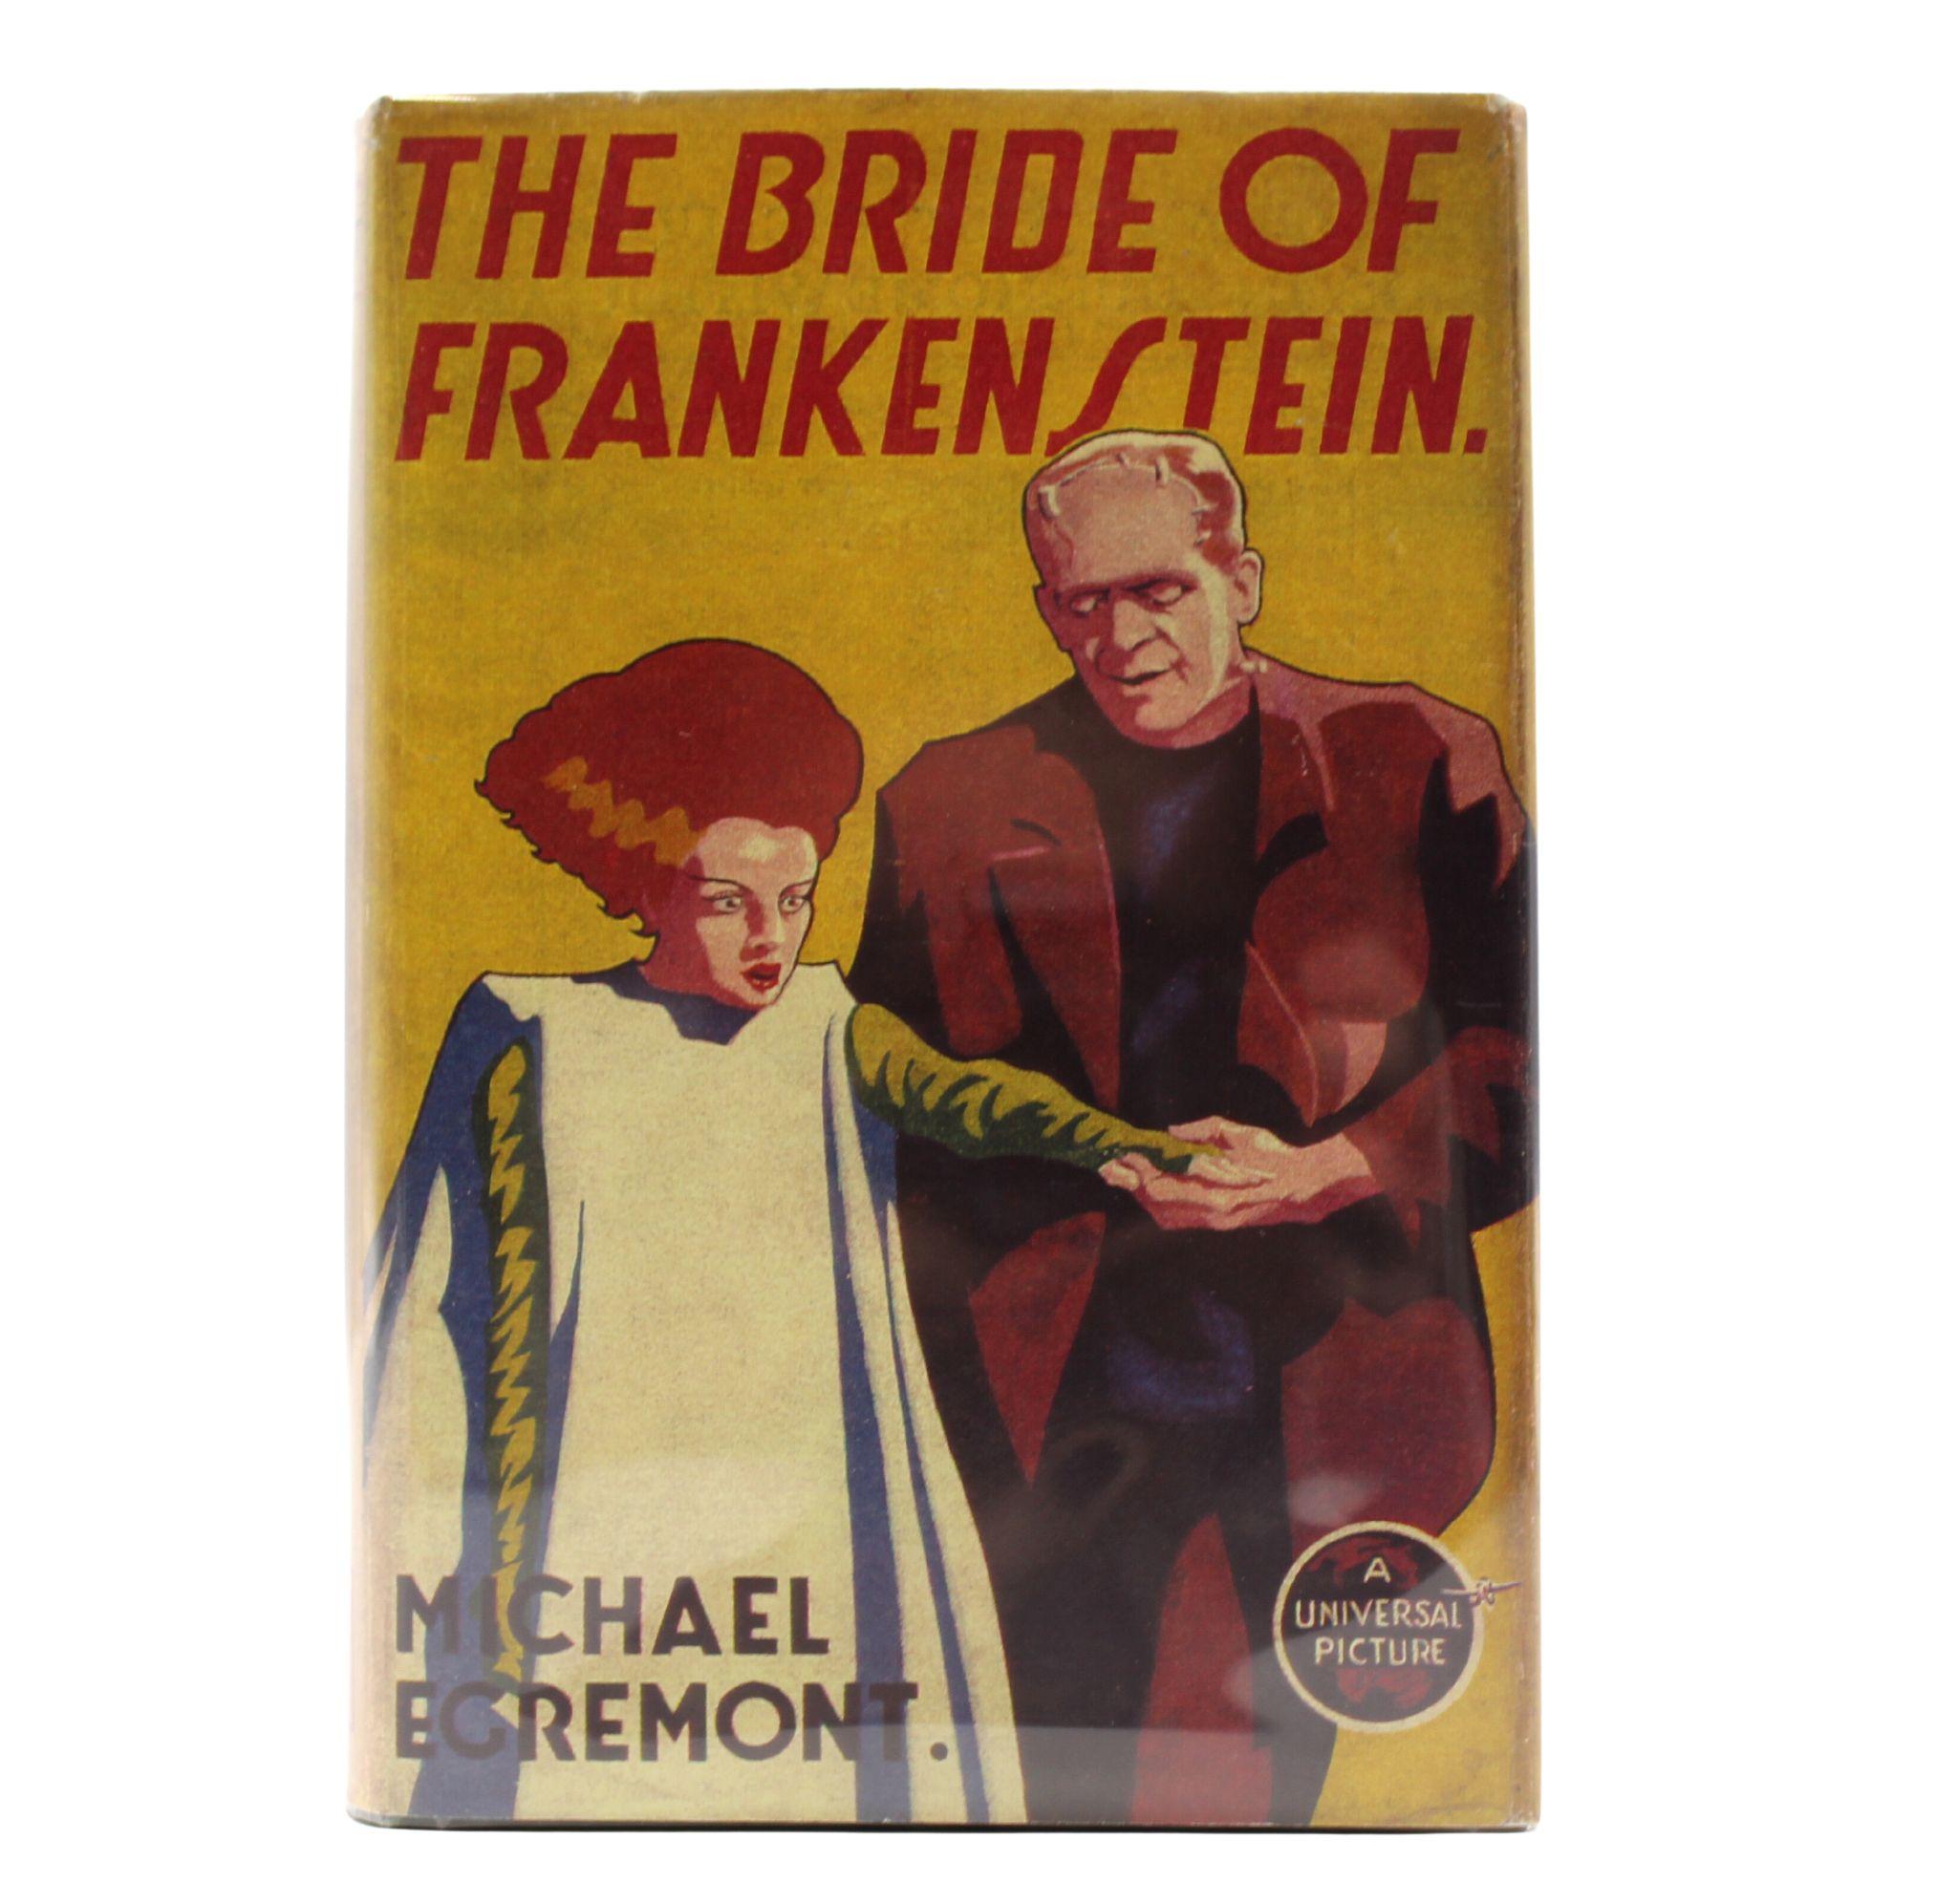 Paper The Bride of Frankenstein by Michael Egremont, Photoplay Edition, 1936